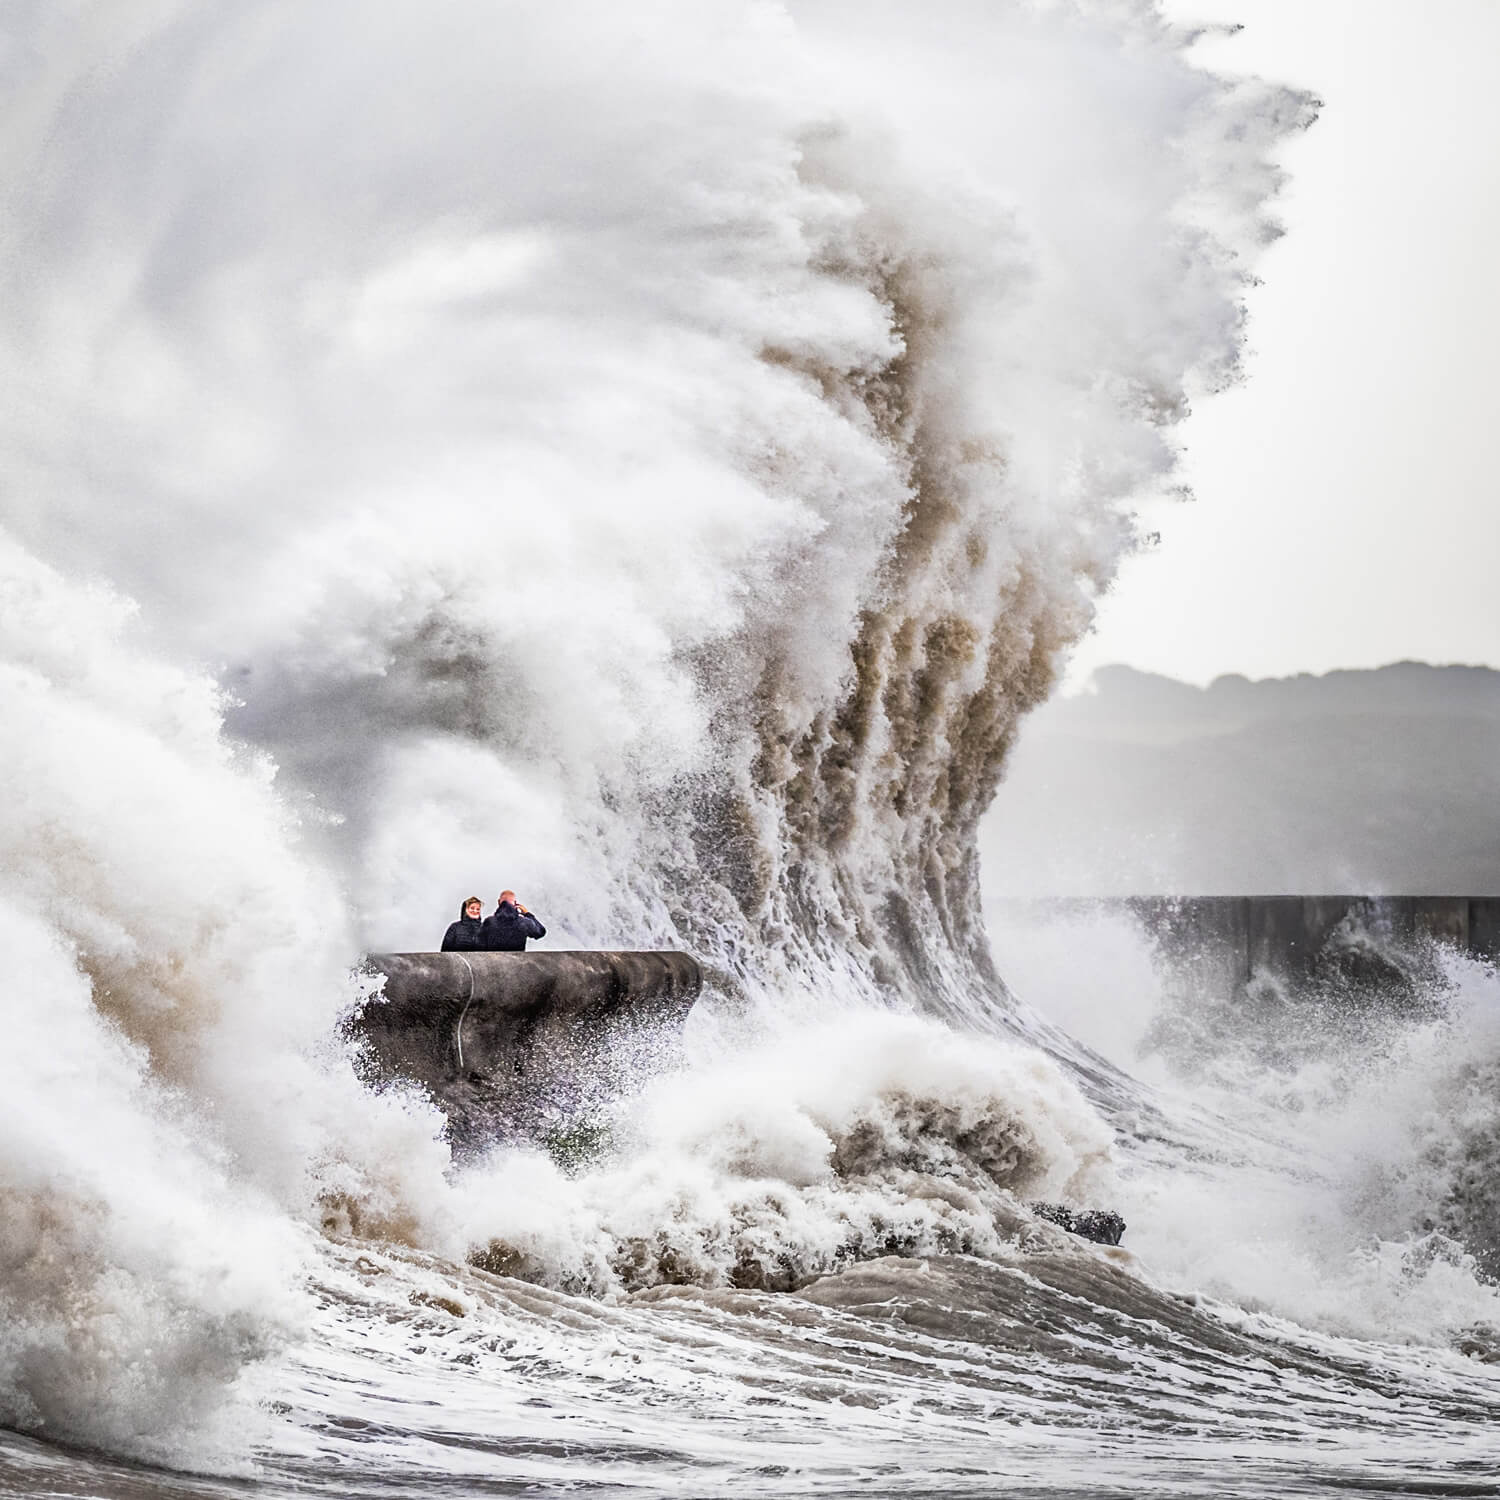 Two people standing on a concrete sea wall witness a colossal wave, resembling a liquid mountain, as it crashes over them, encapsulating the raw power of nature’s elements